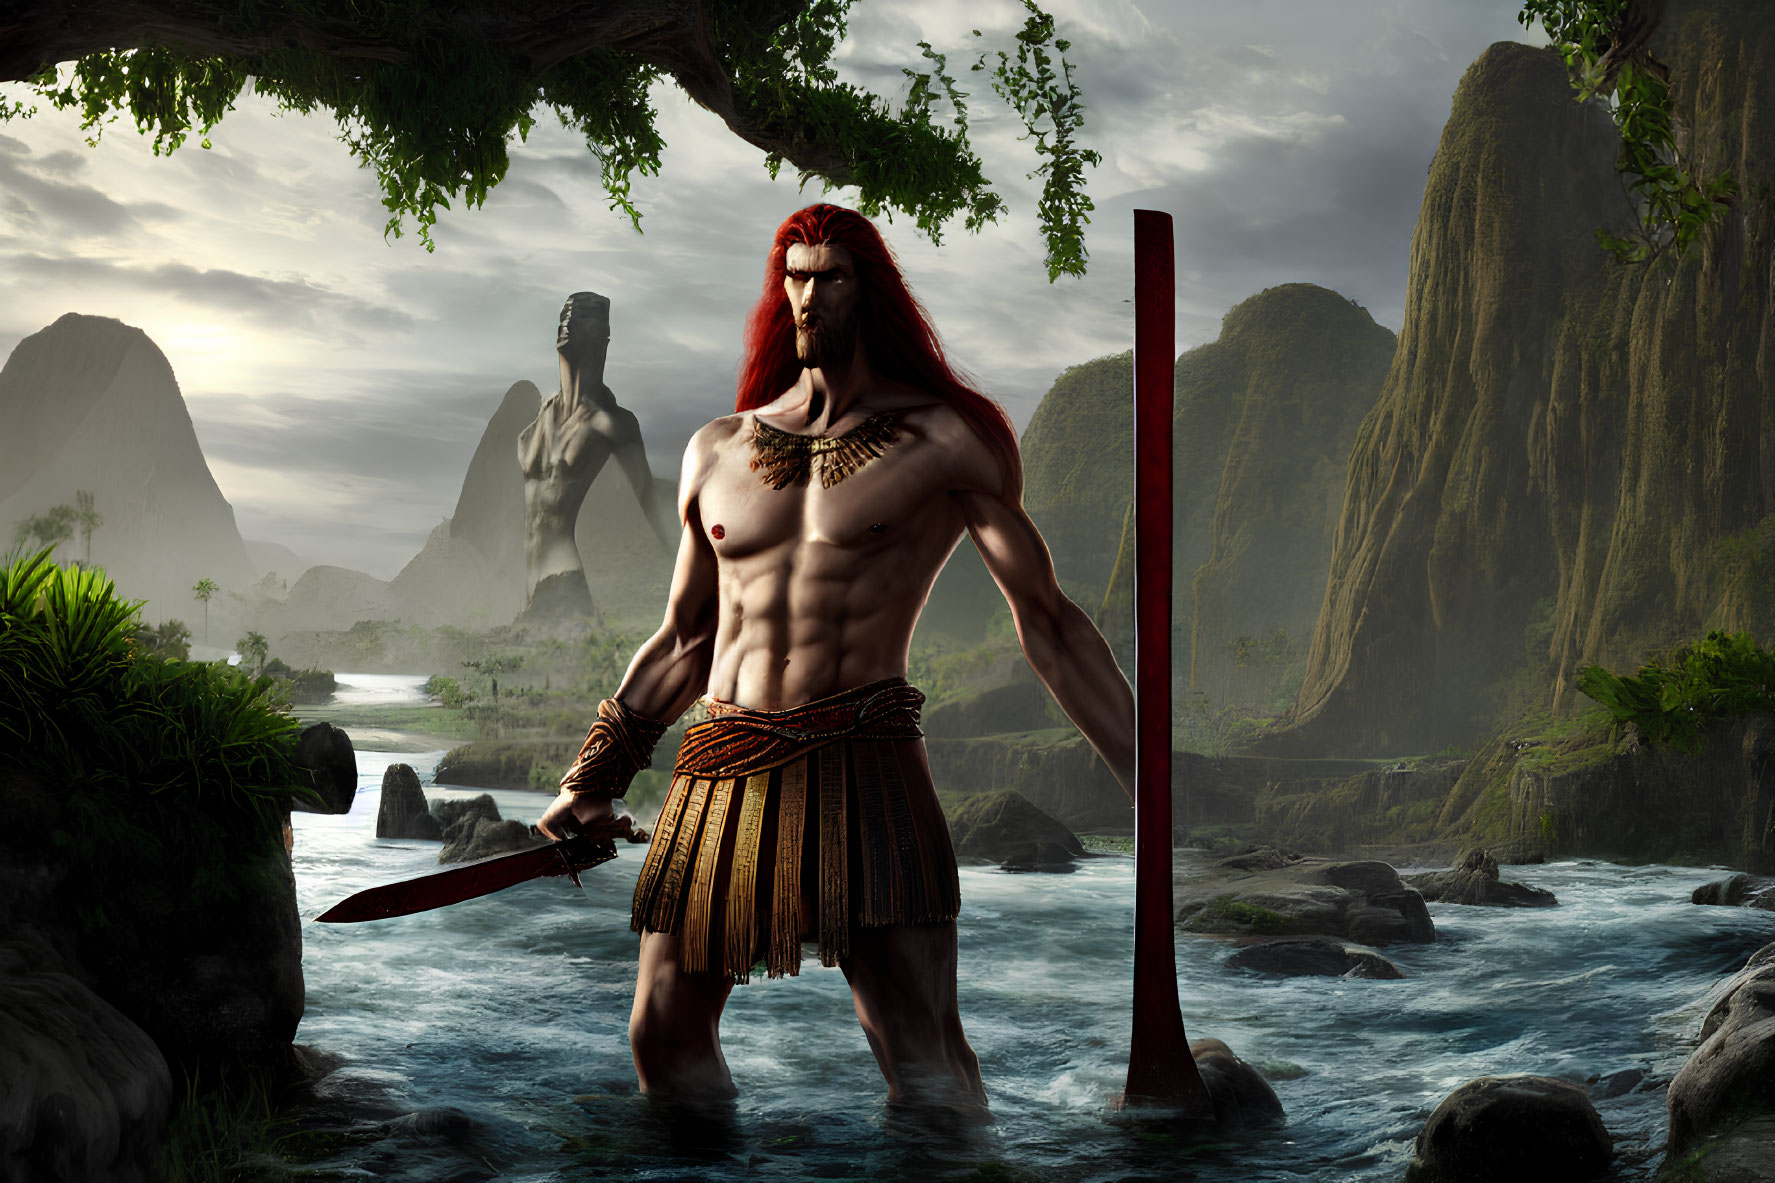 Red-Haired Warrior with Sword and Shield in Lush Landscape